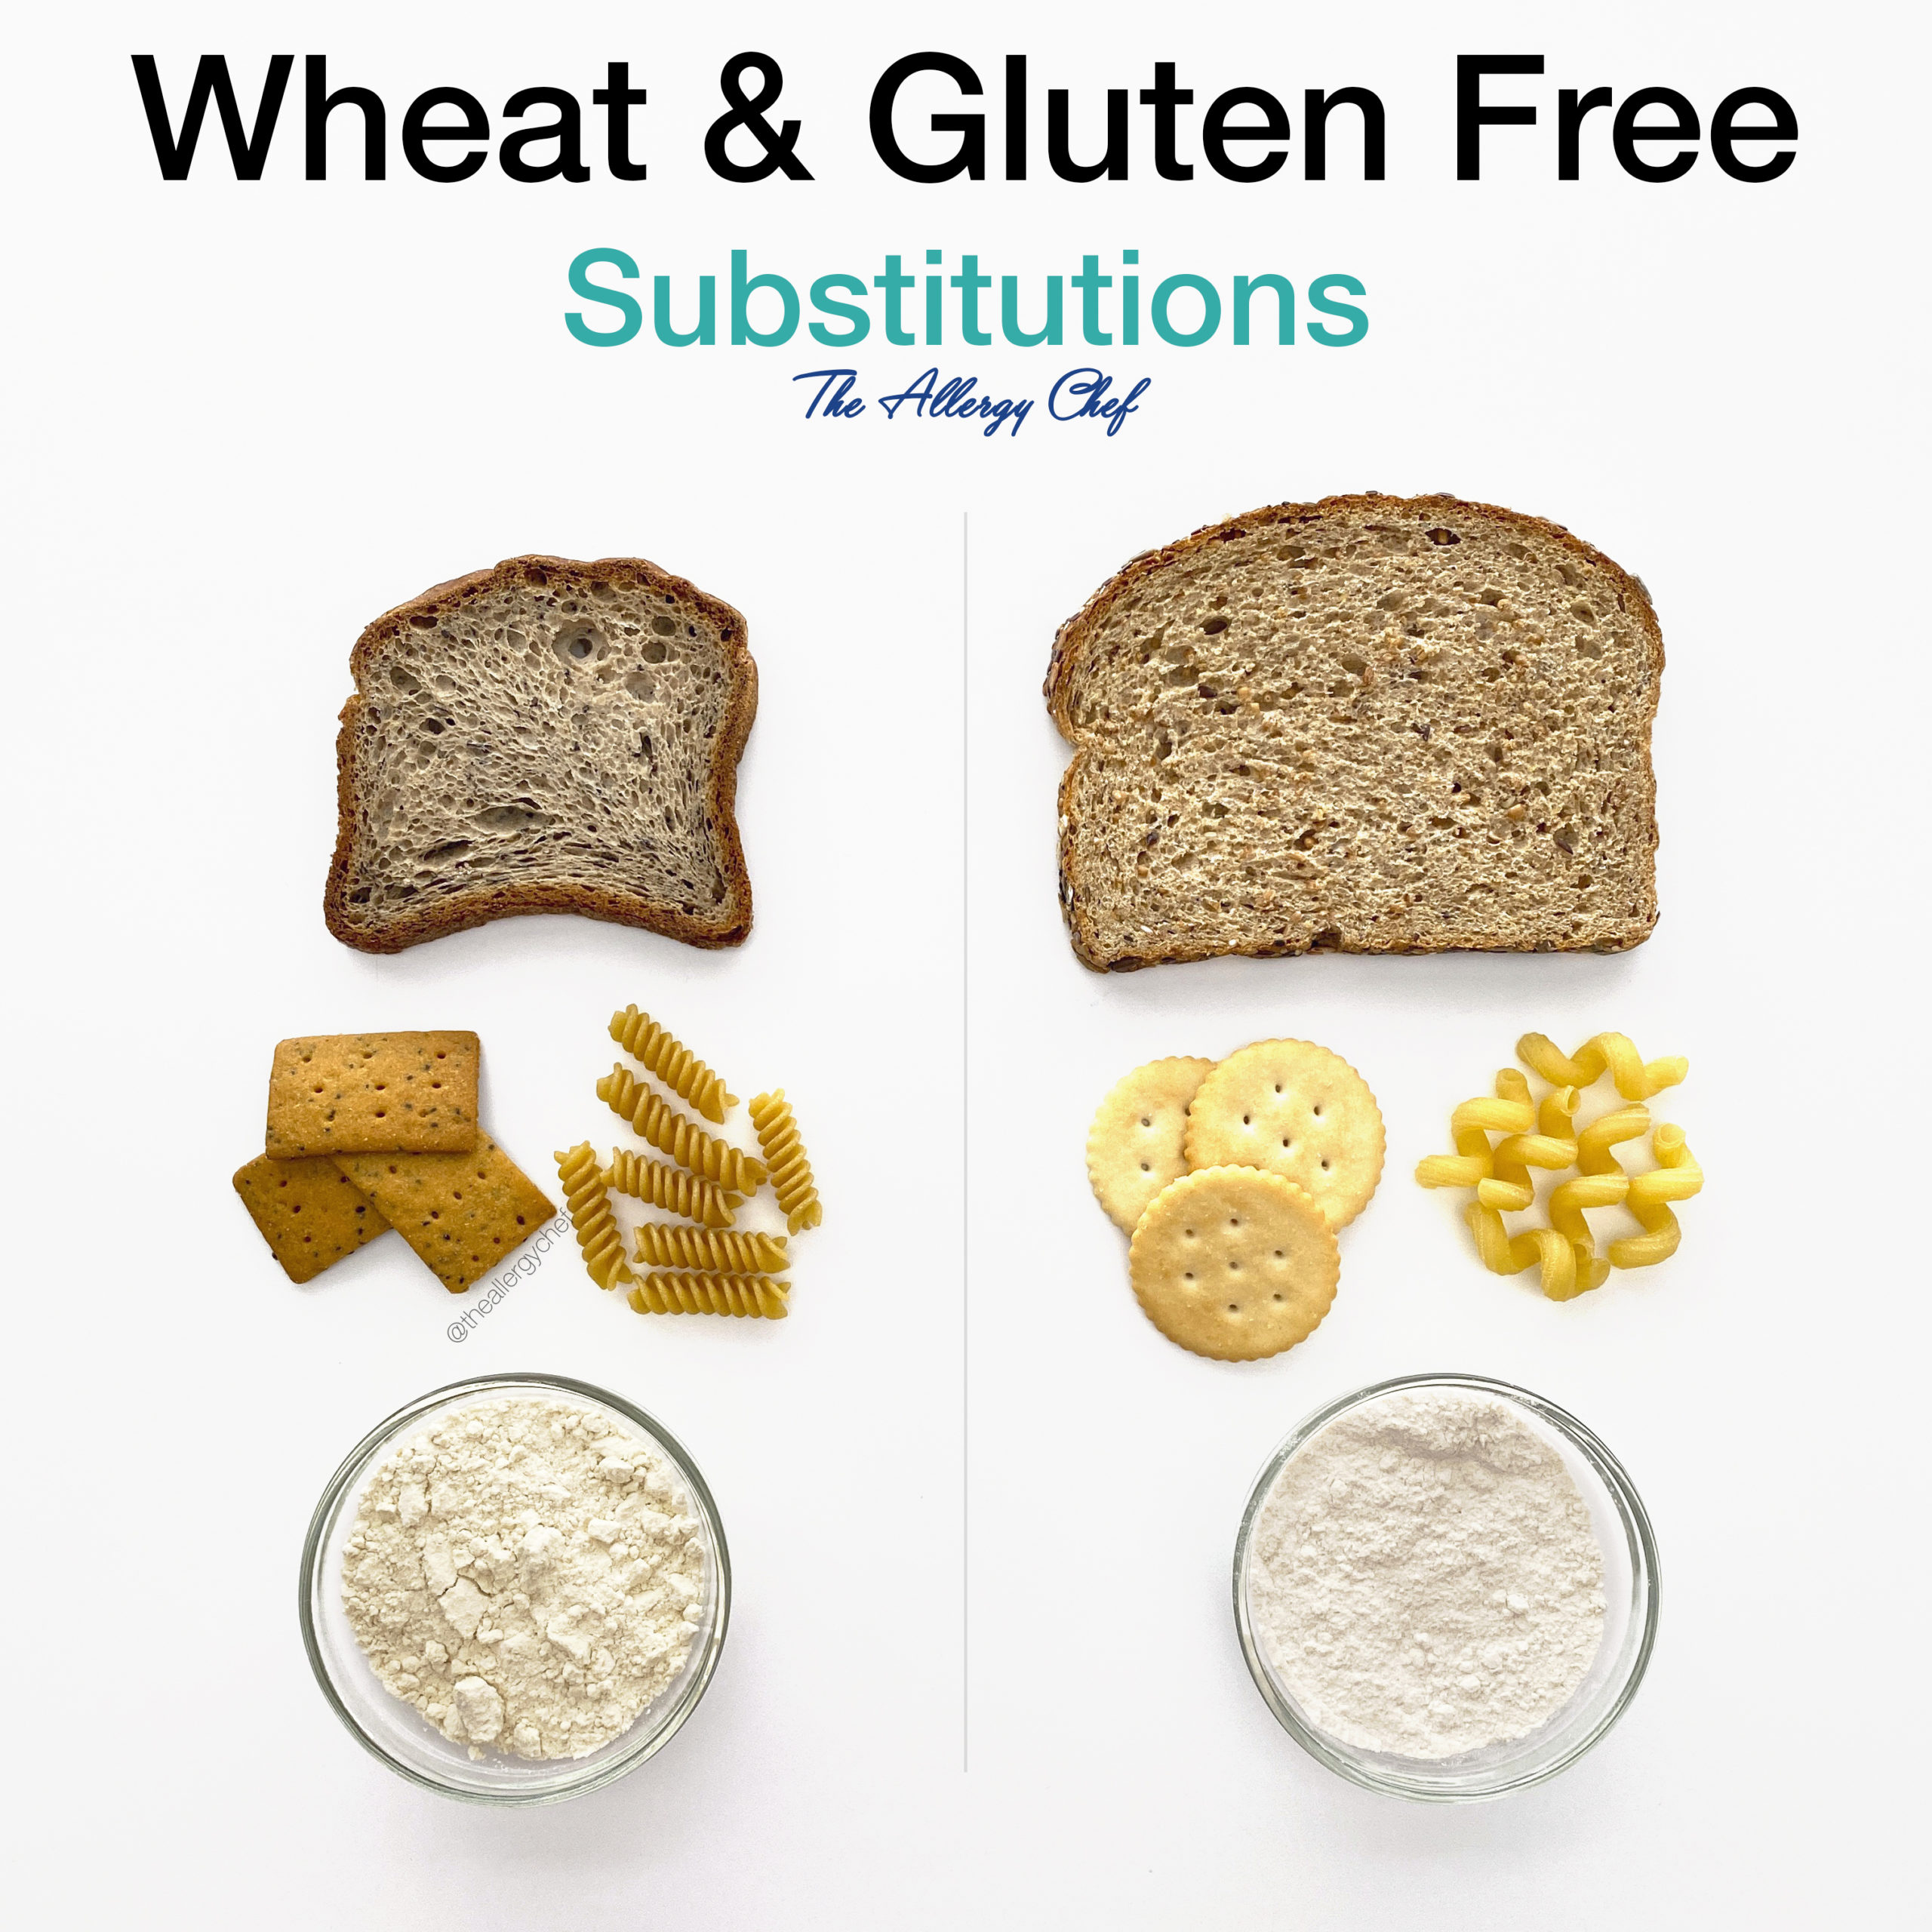 Wheat Free Substitutions and Gluten Free Substitutions